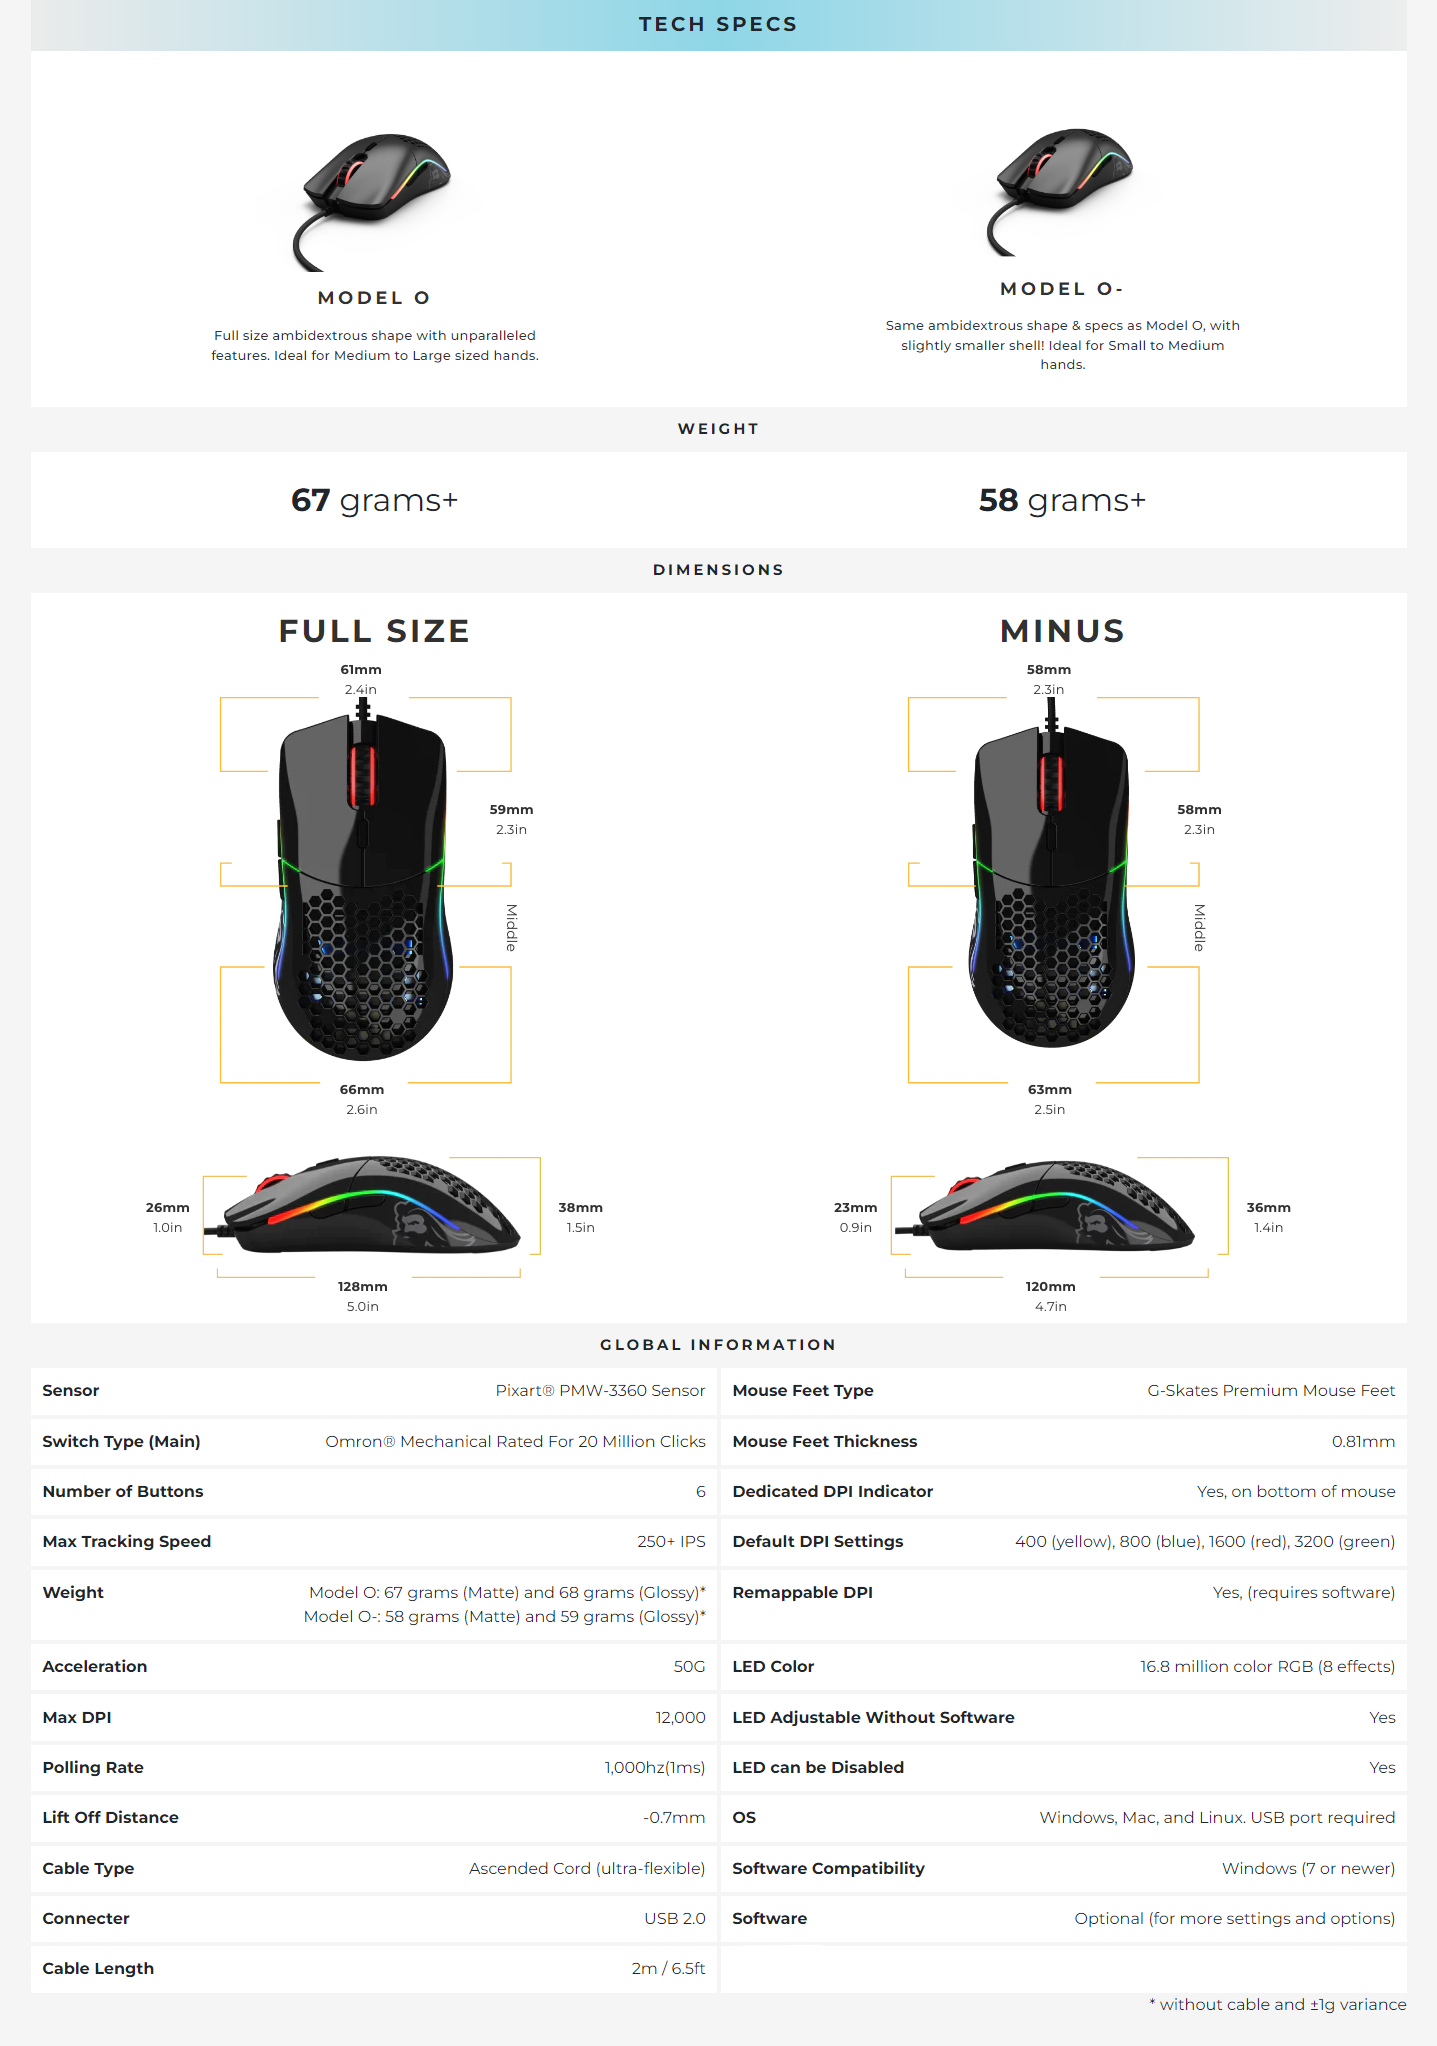 A large marketing image providing additional information about the product Glorious Model O Minus Wired Gaming Mouse - Glossy Black - Additional alt info not provided